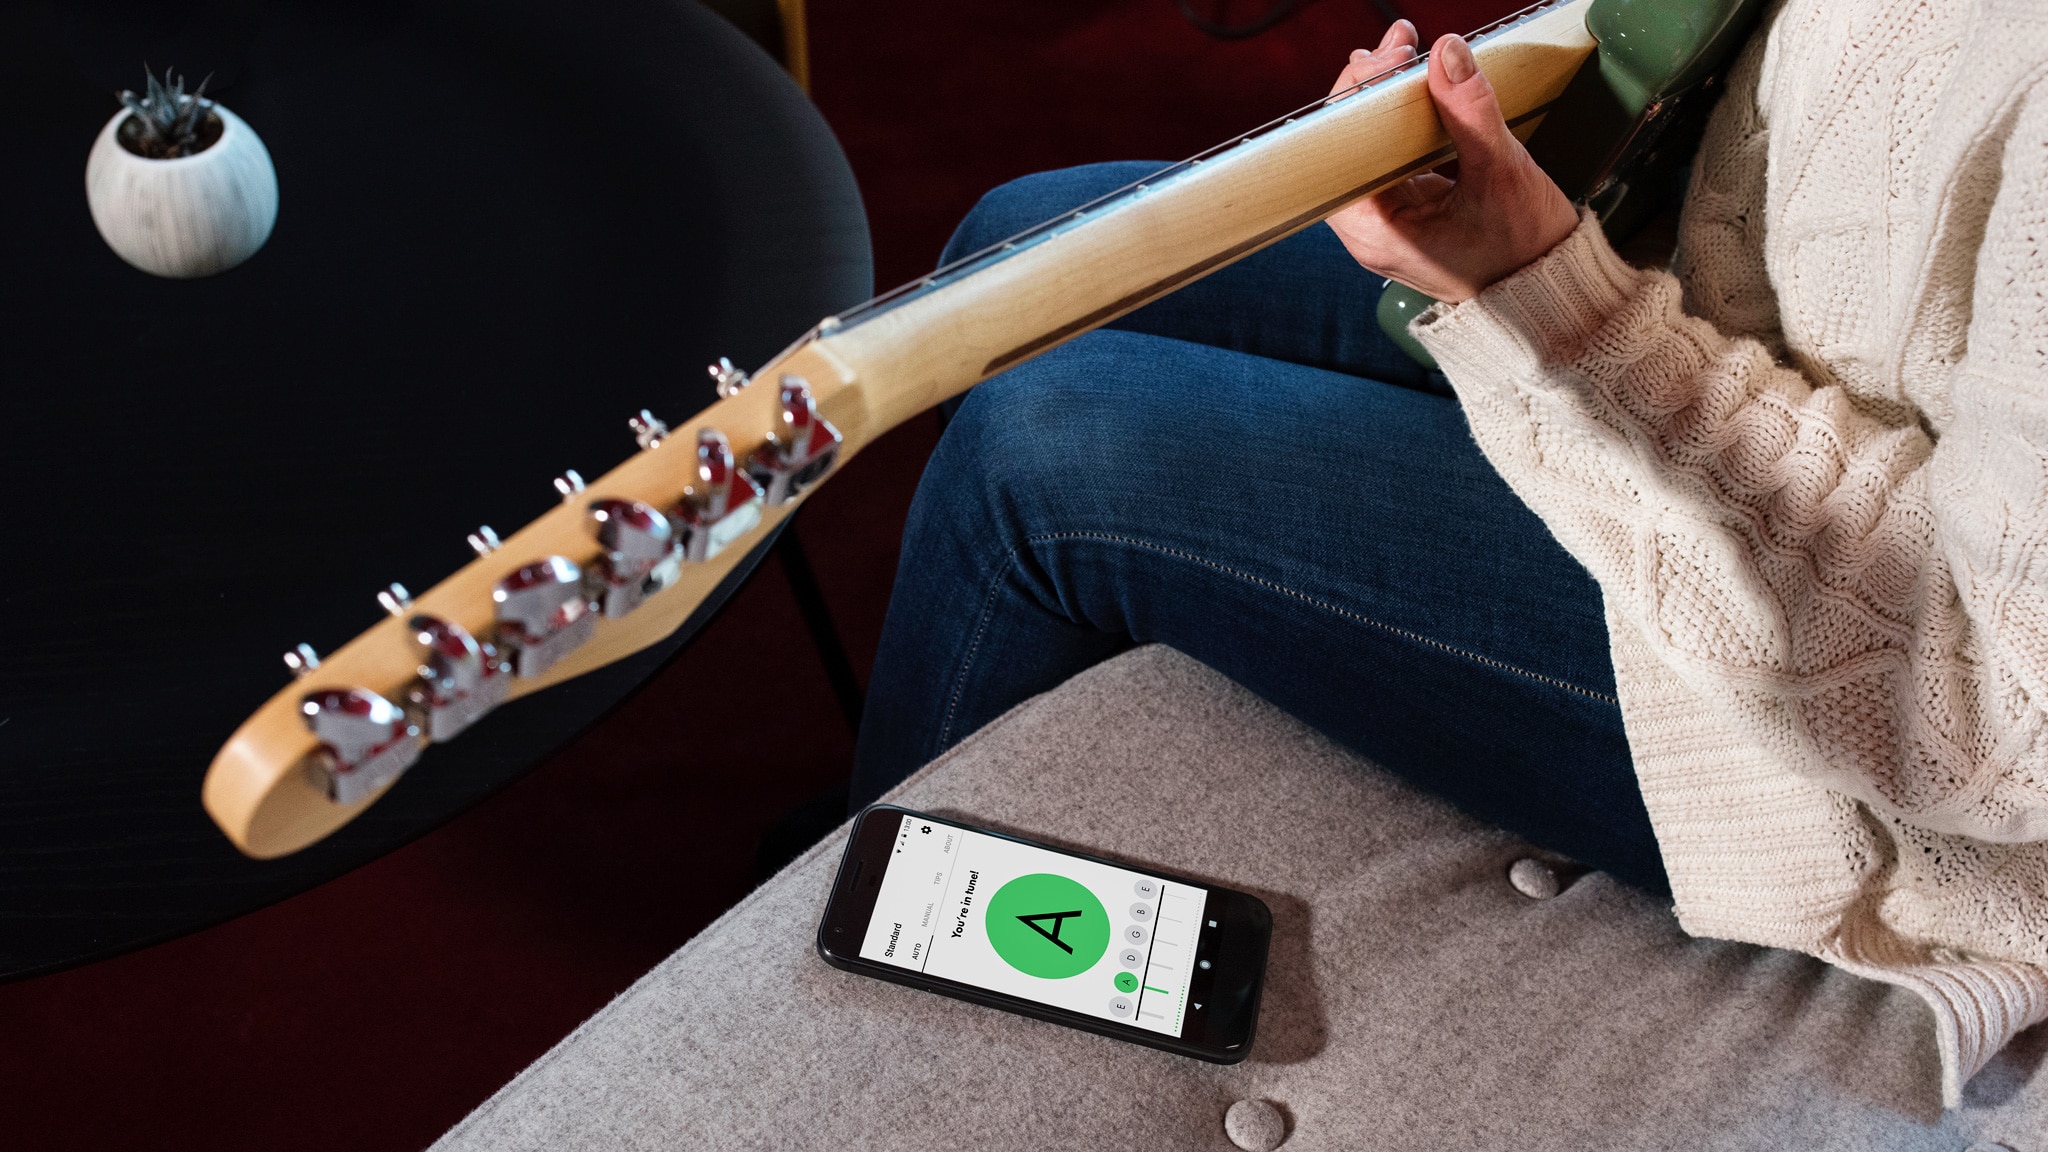 Fender Tune App now available on Android